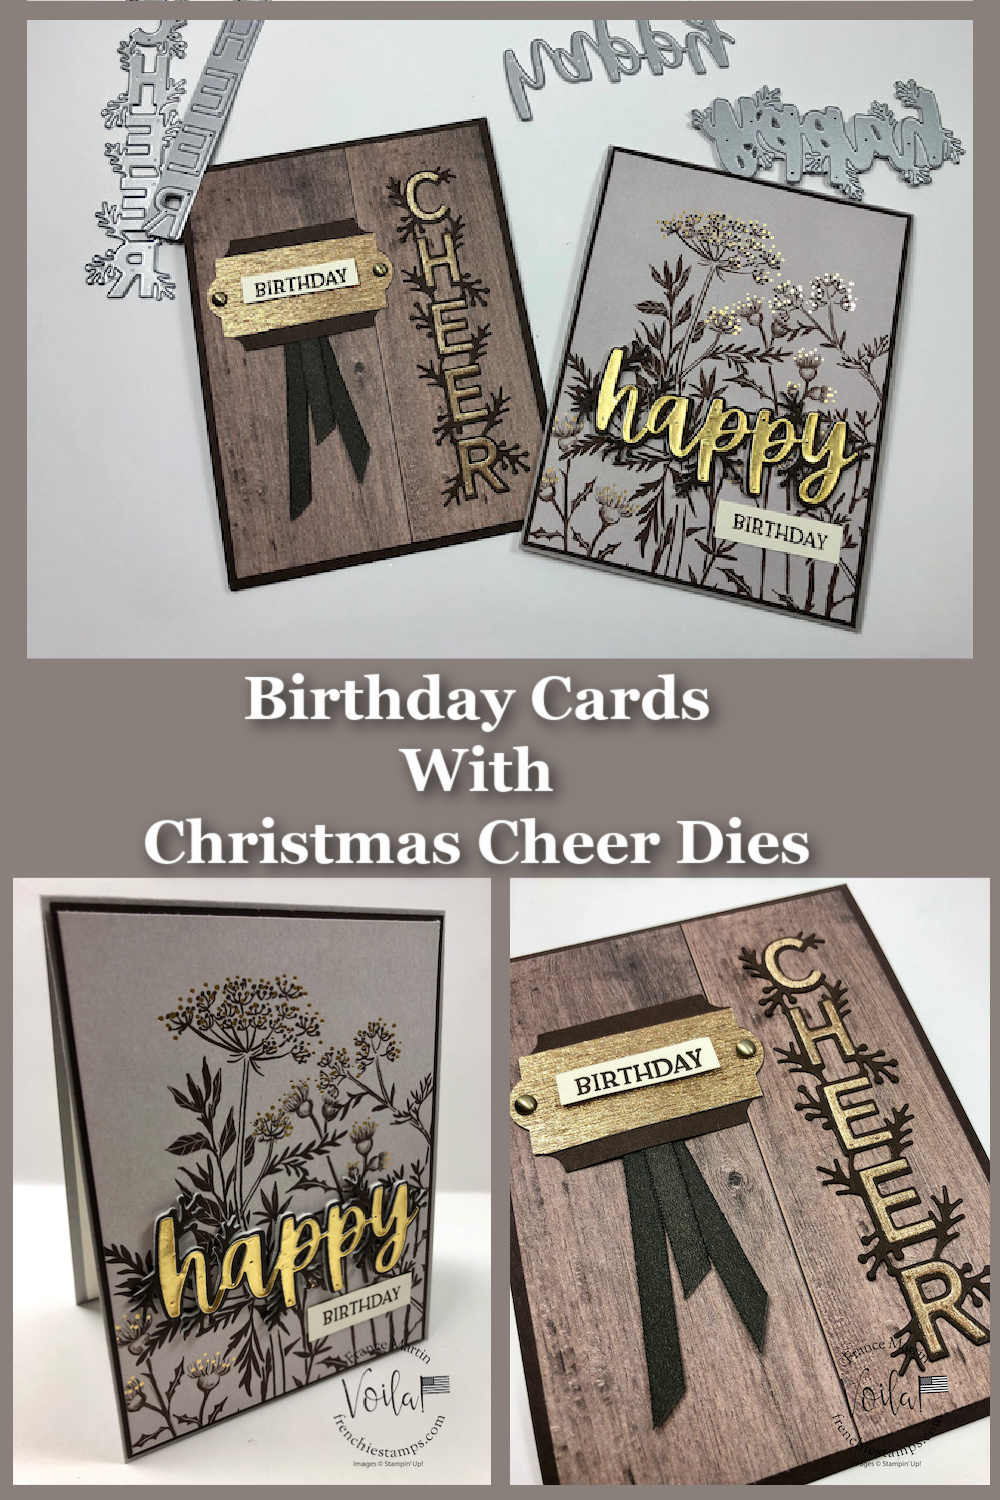 Birthday Cards with Christmas Cheer Dies